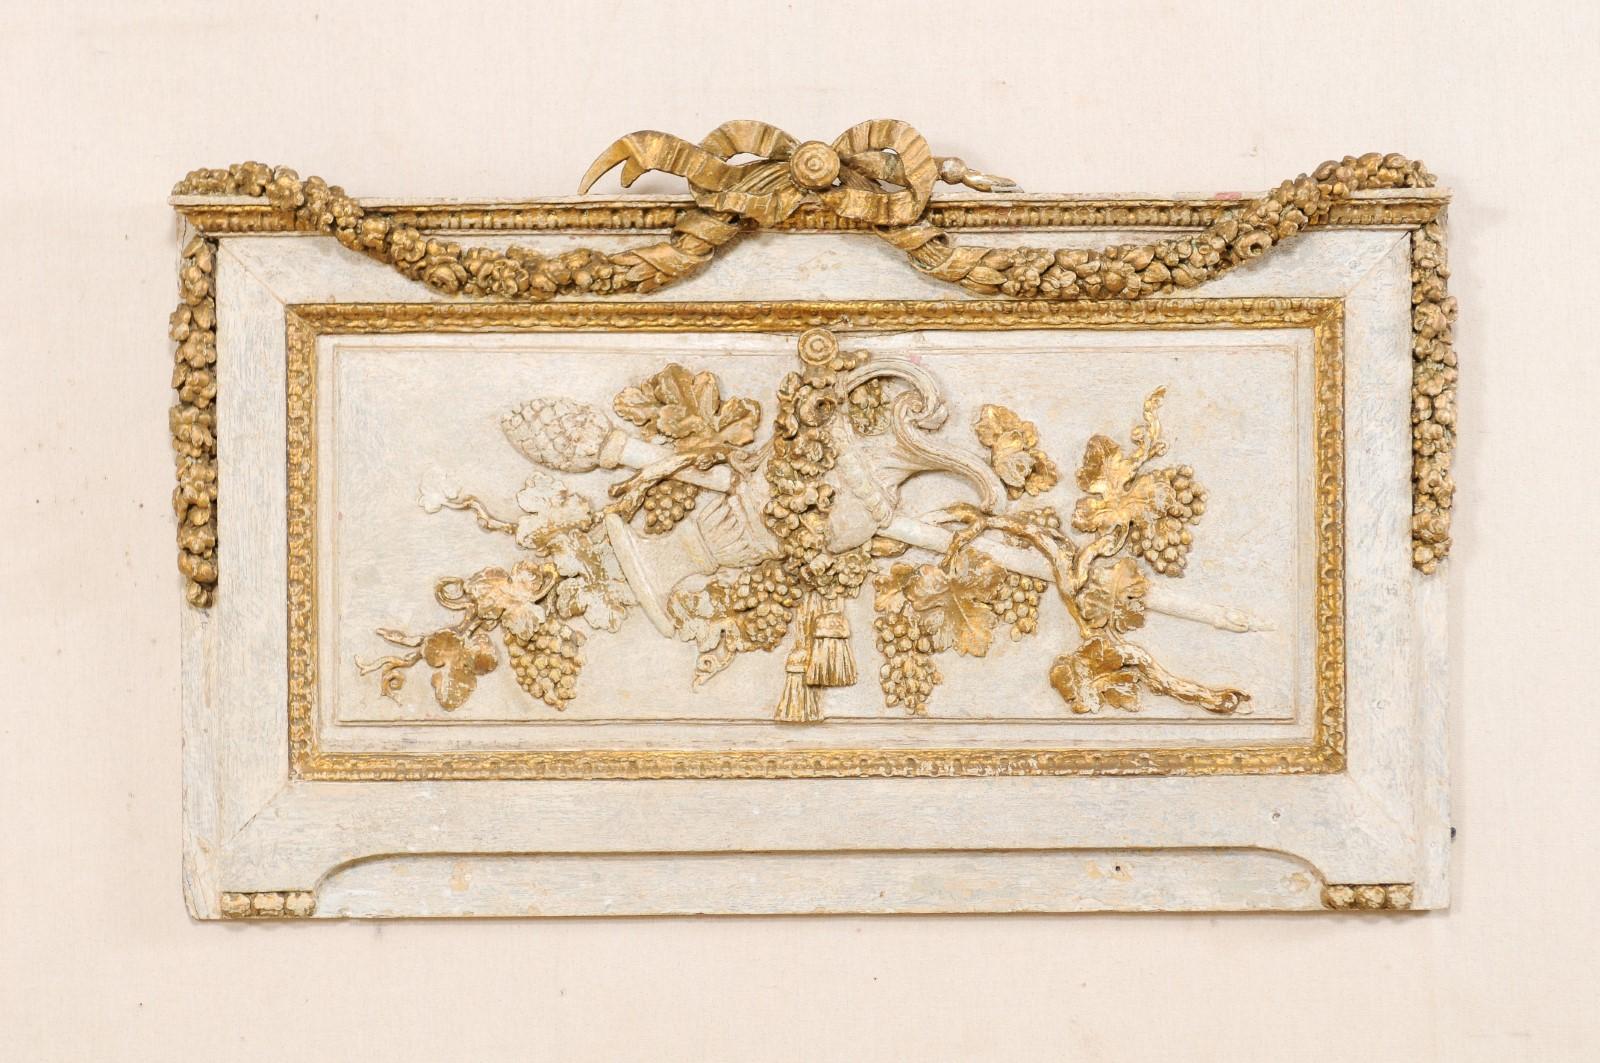 A French wood carved decorative hanging wall plaque from the 19th century. This nicely carved wall decoration from France is rectangular-shaped, and features a three dimensional hand carved ribbon at top crest, with floral swags hanging down